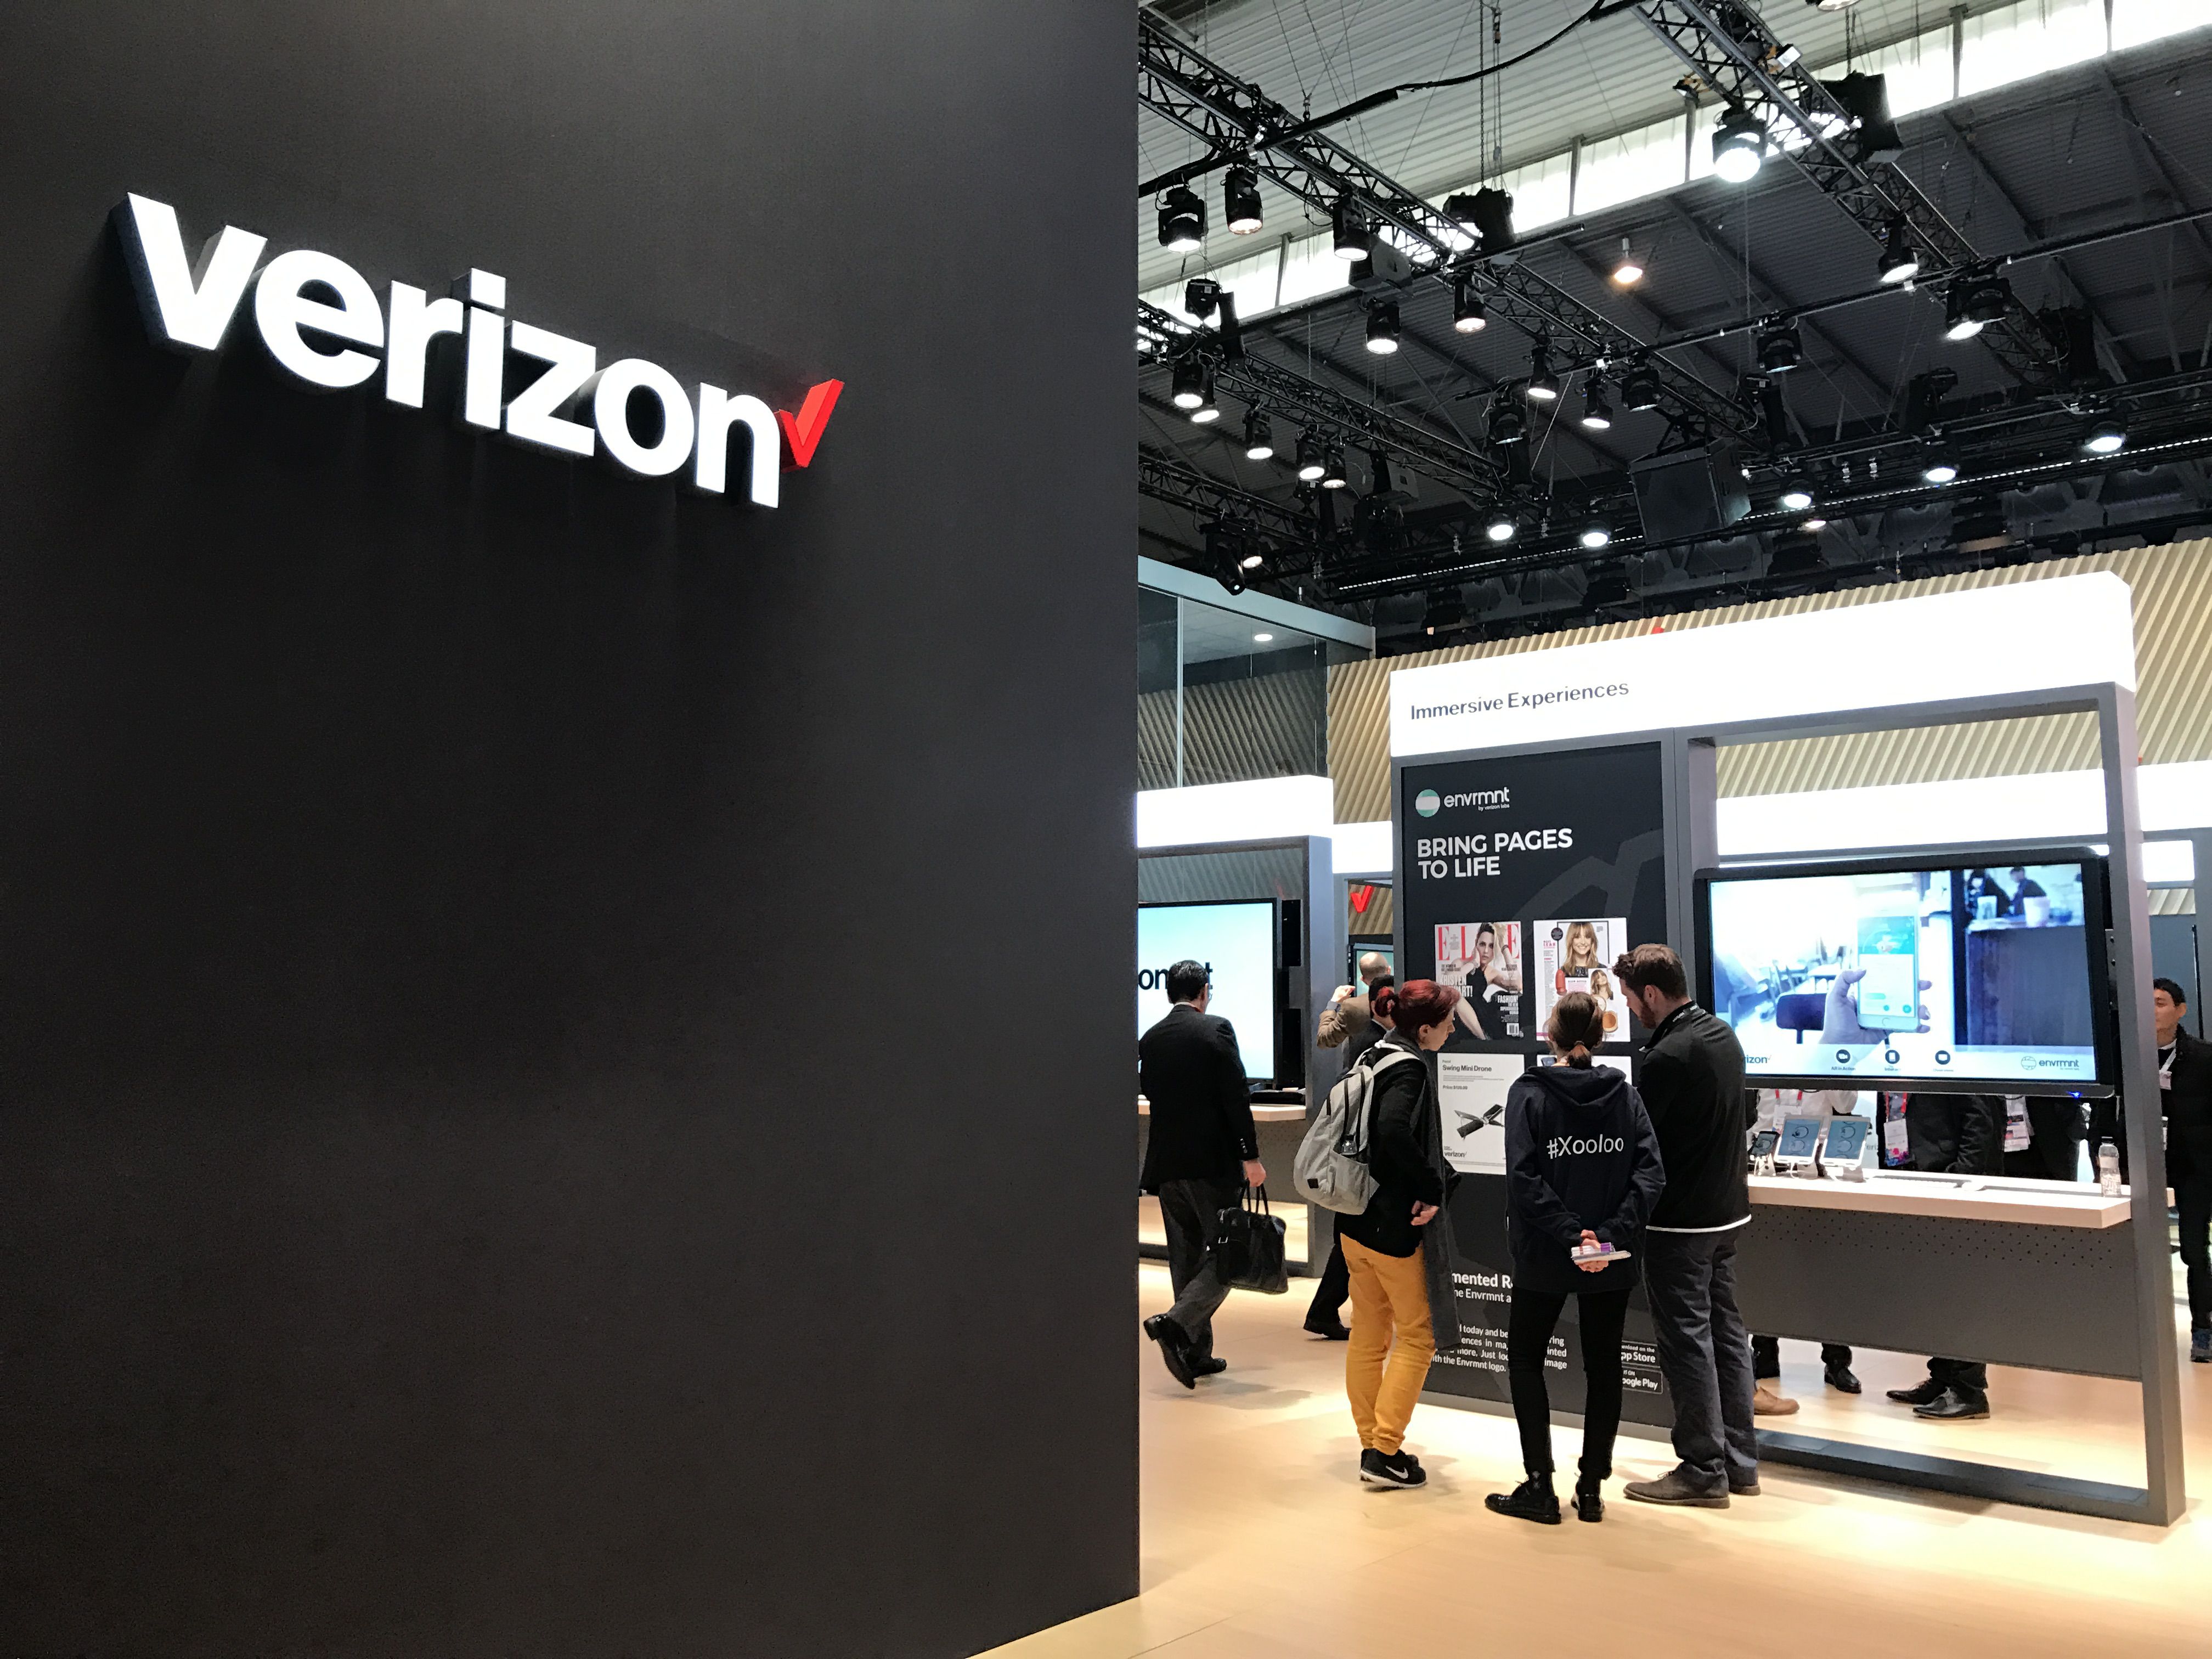 Verizon launches its first 5G wireless network for smartphones.